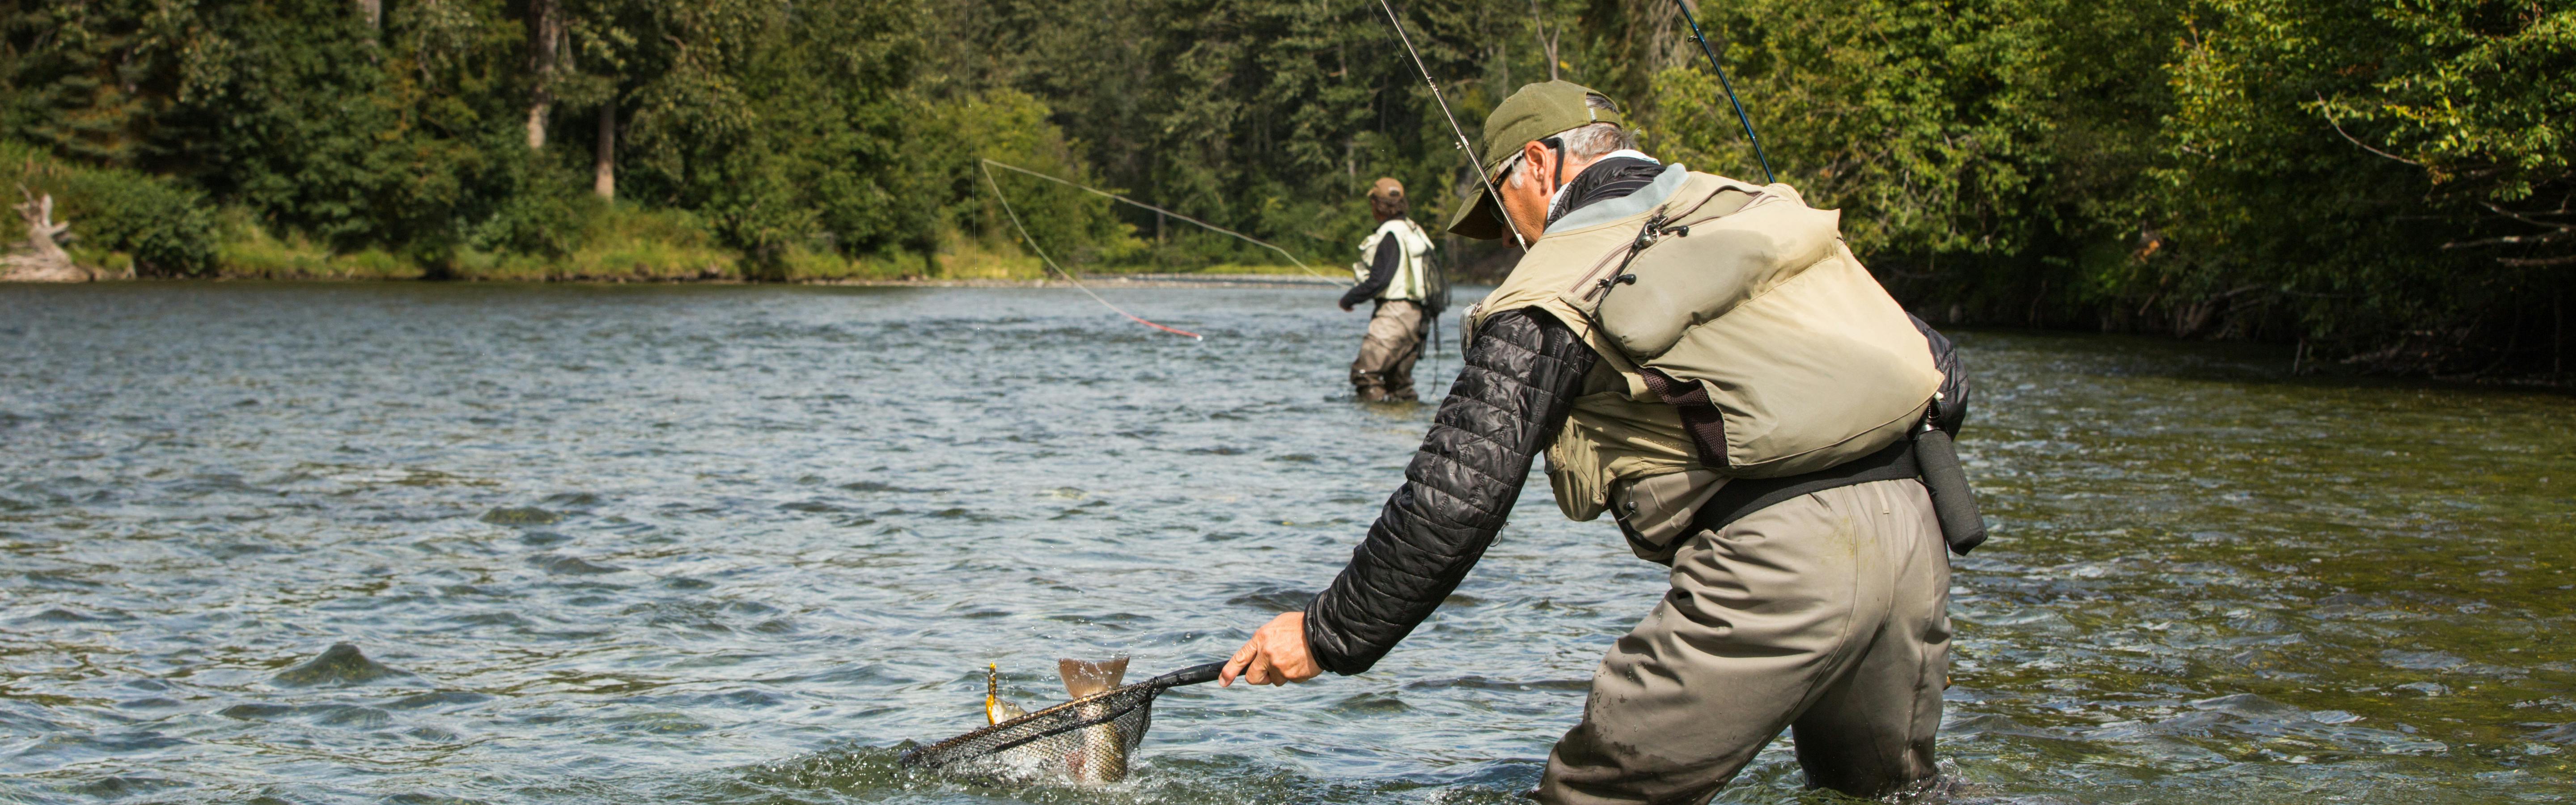 What Are the BEST Fly Fishing Waders? - Podcast Ep. 57 (Untangled